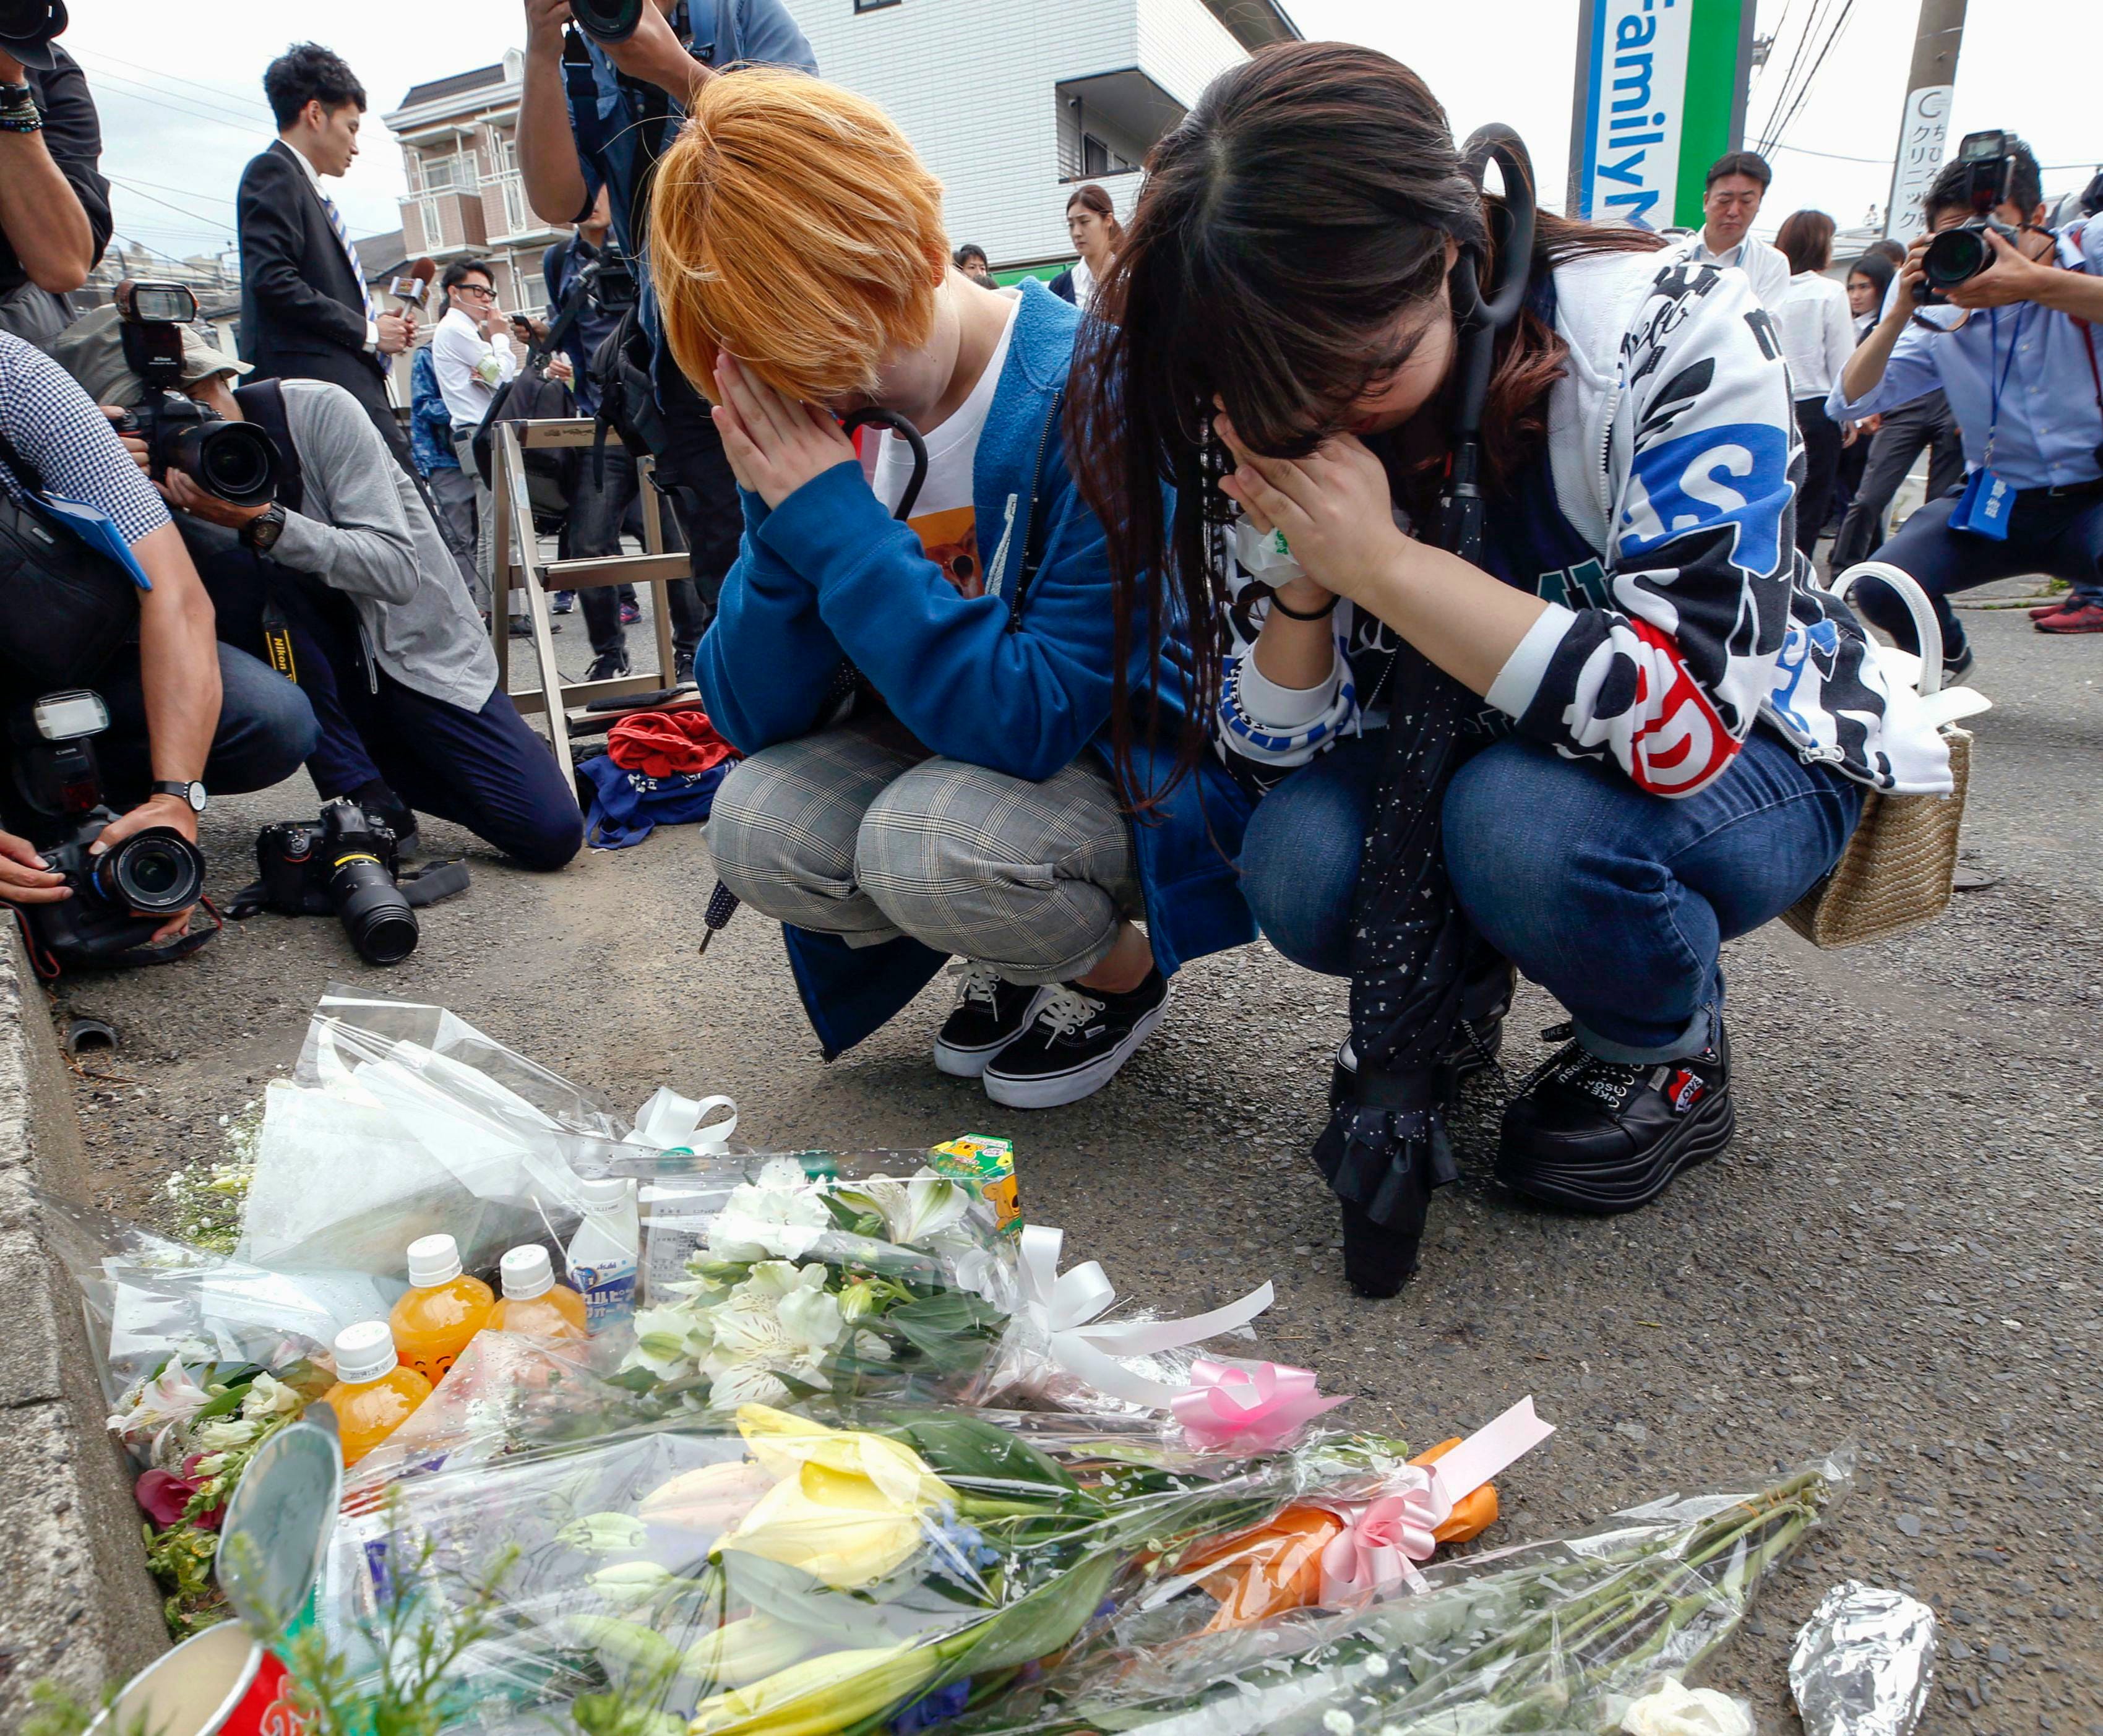 Women pray after offering flowers near the scene where a man wielding a knife attacked commuters in Kawasaki, near Tokyo Tuesday, May 28, 2019.